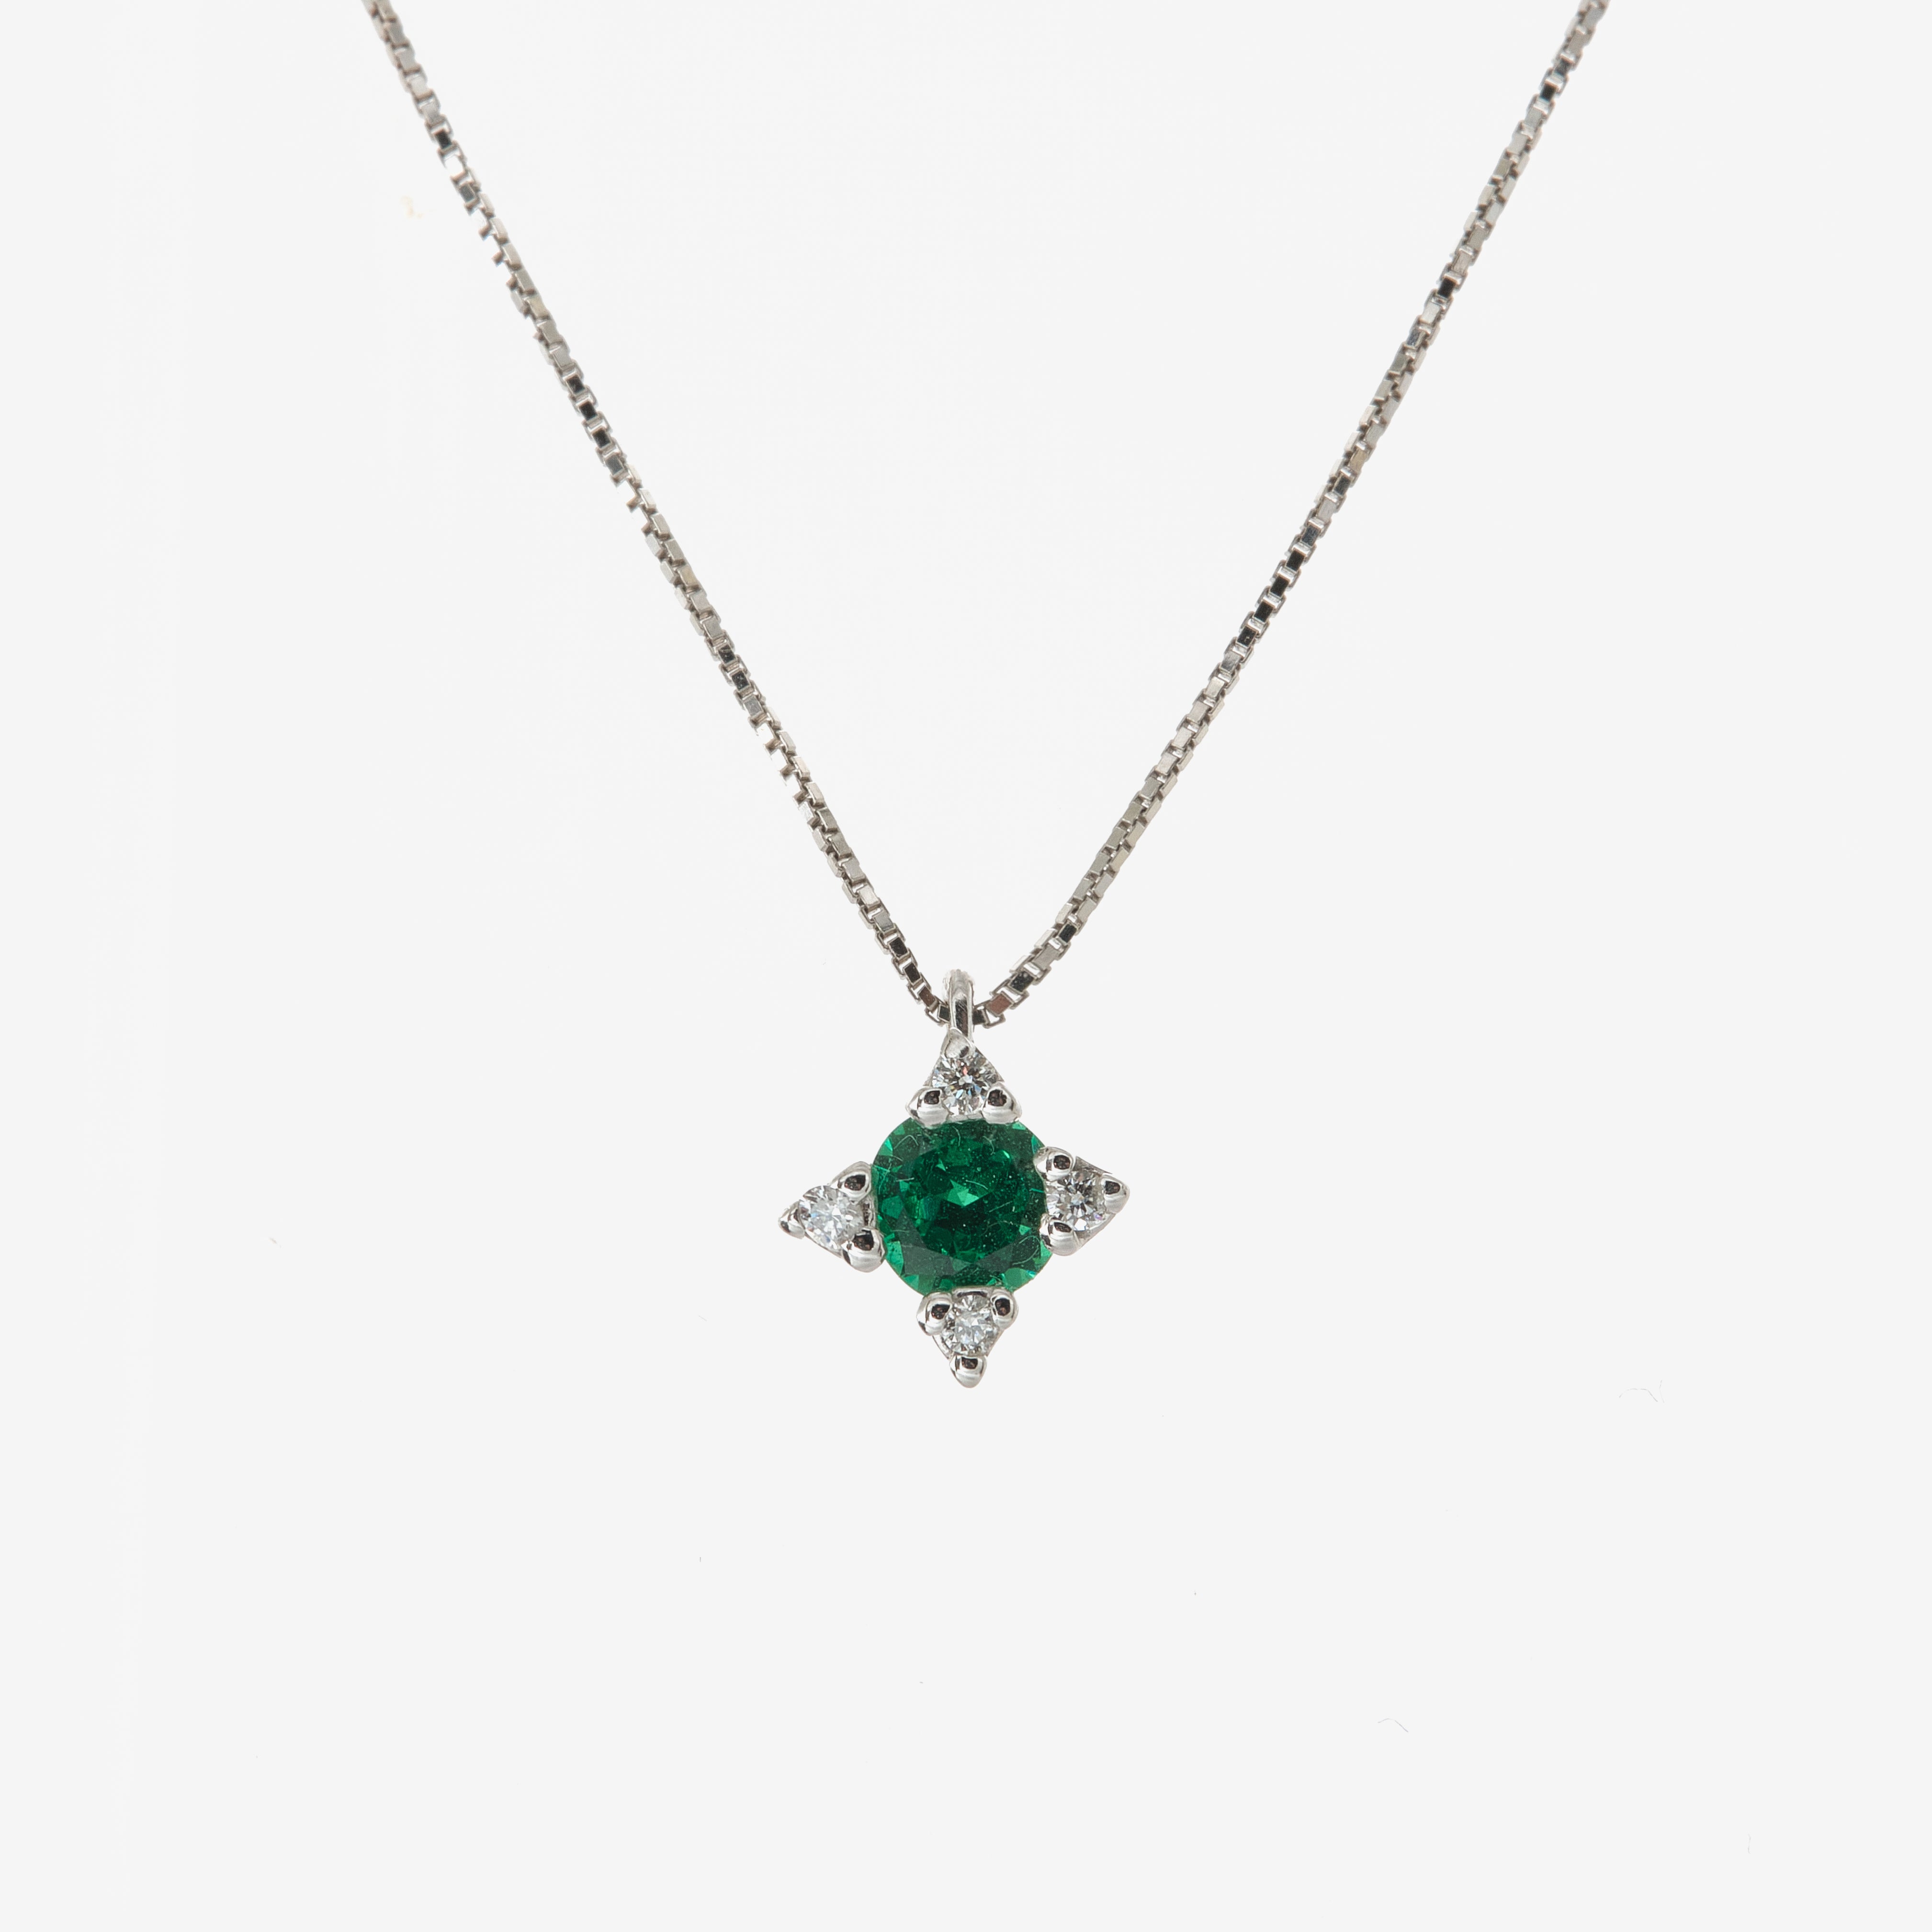 Star necklace with emerald and diamonds